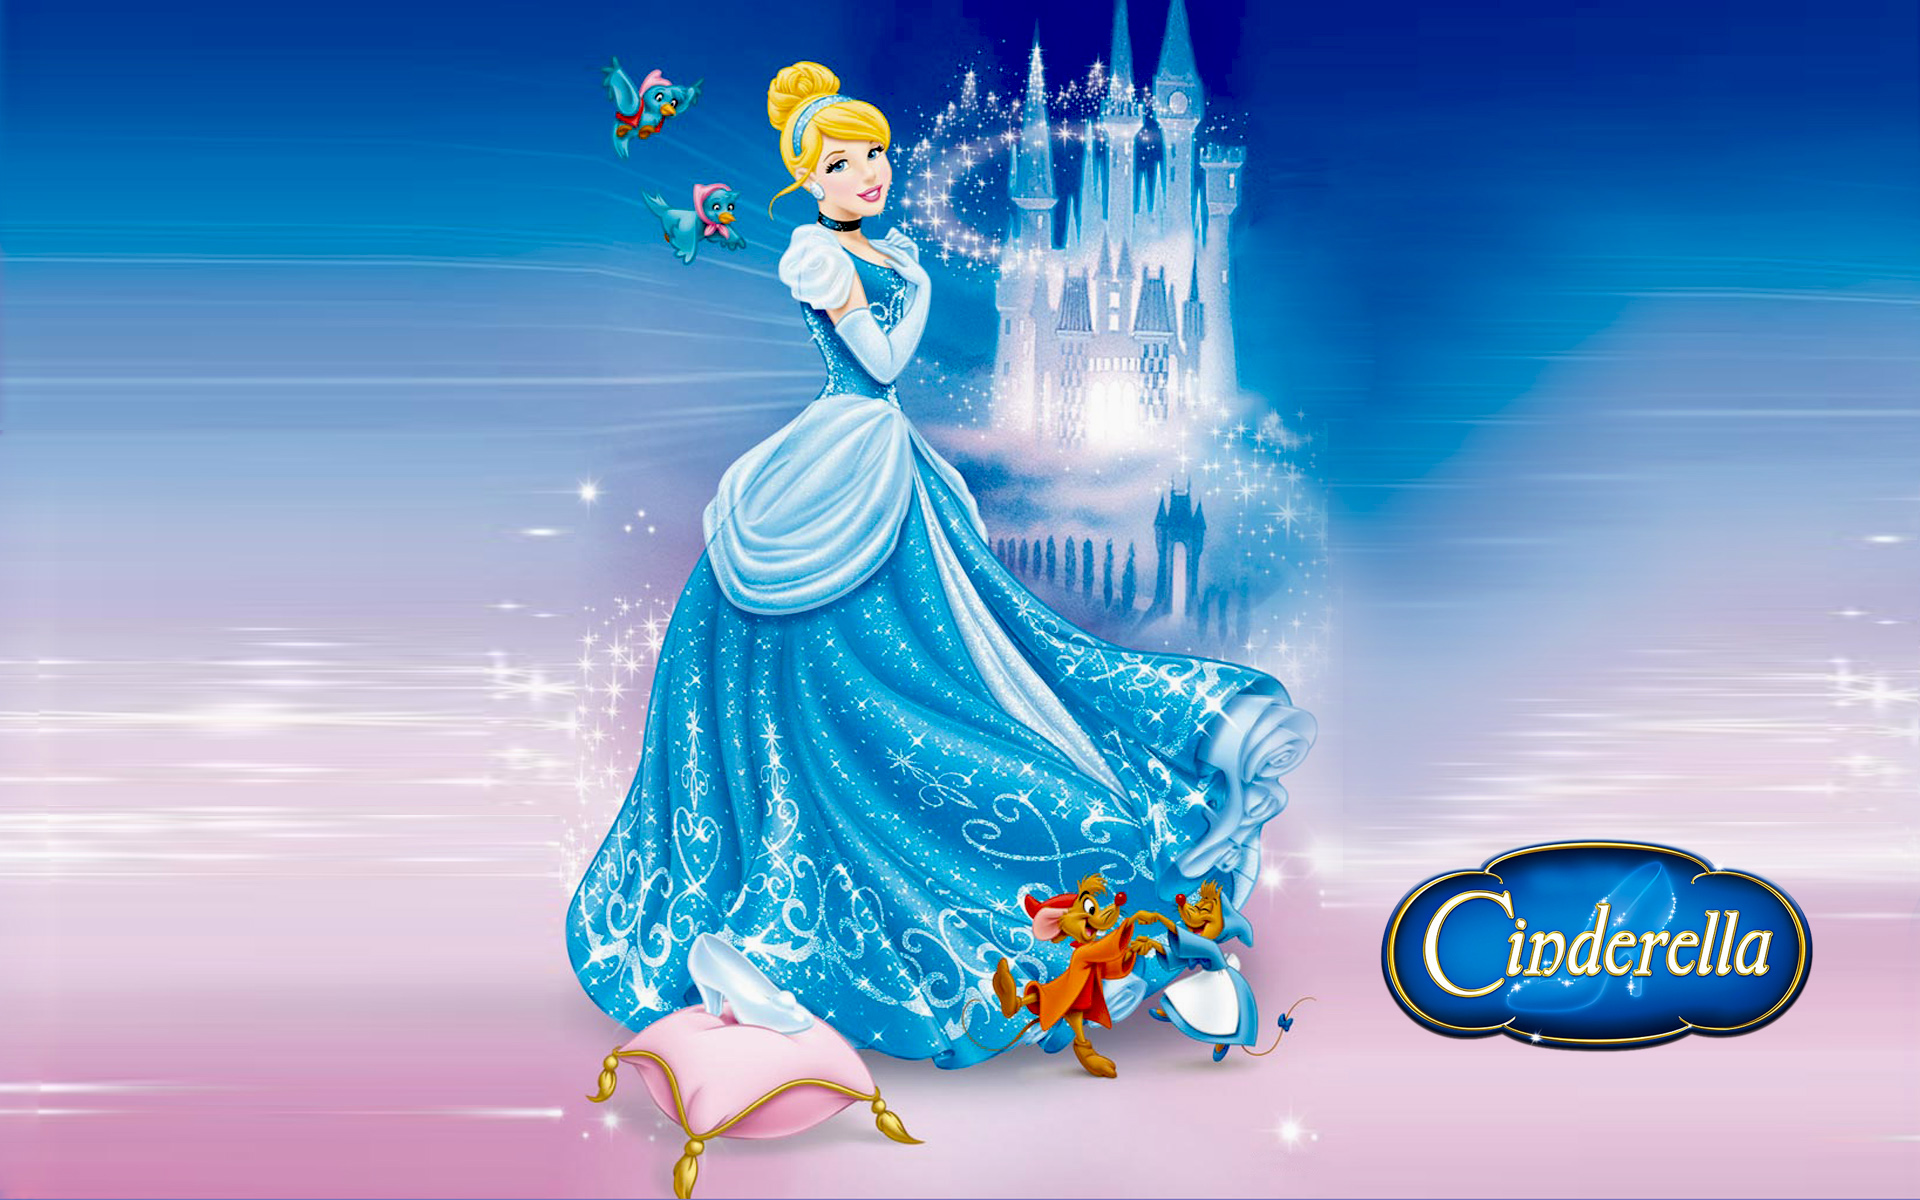 Castle of Cinderella and friends Jaq and Perla Cartoons Pictures Desktop HD...